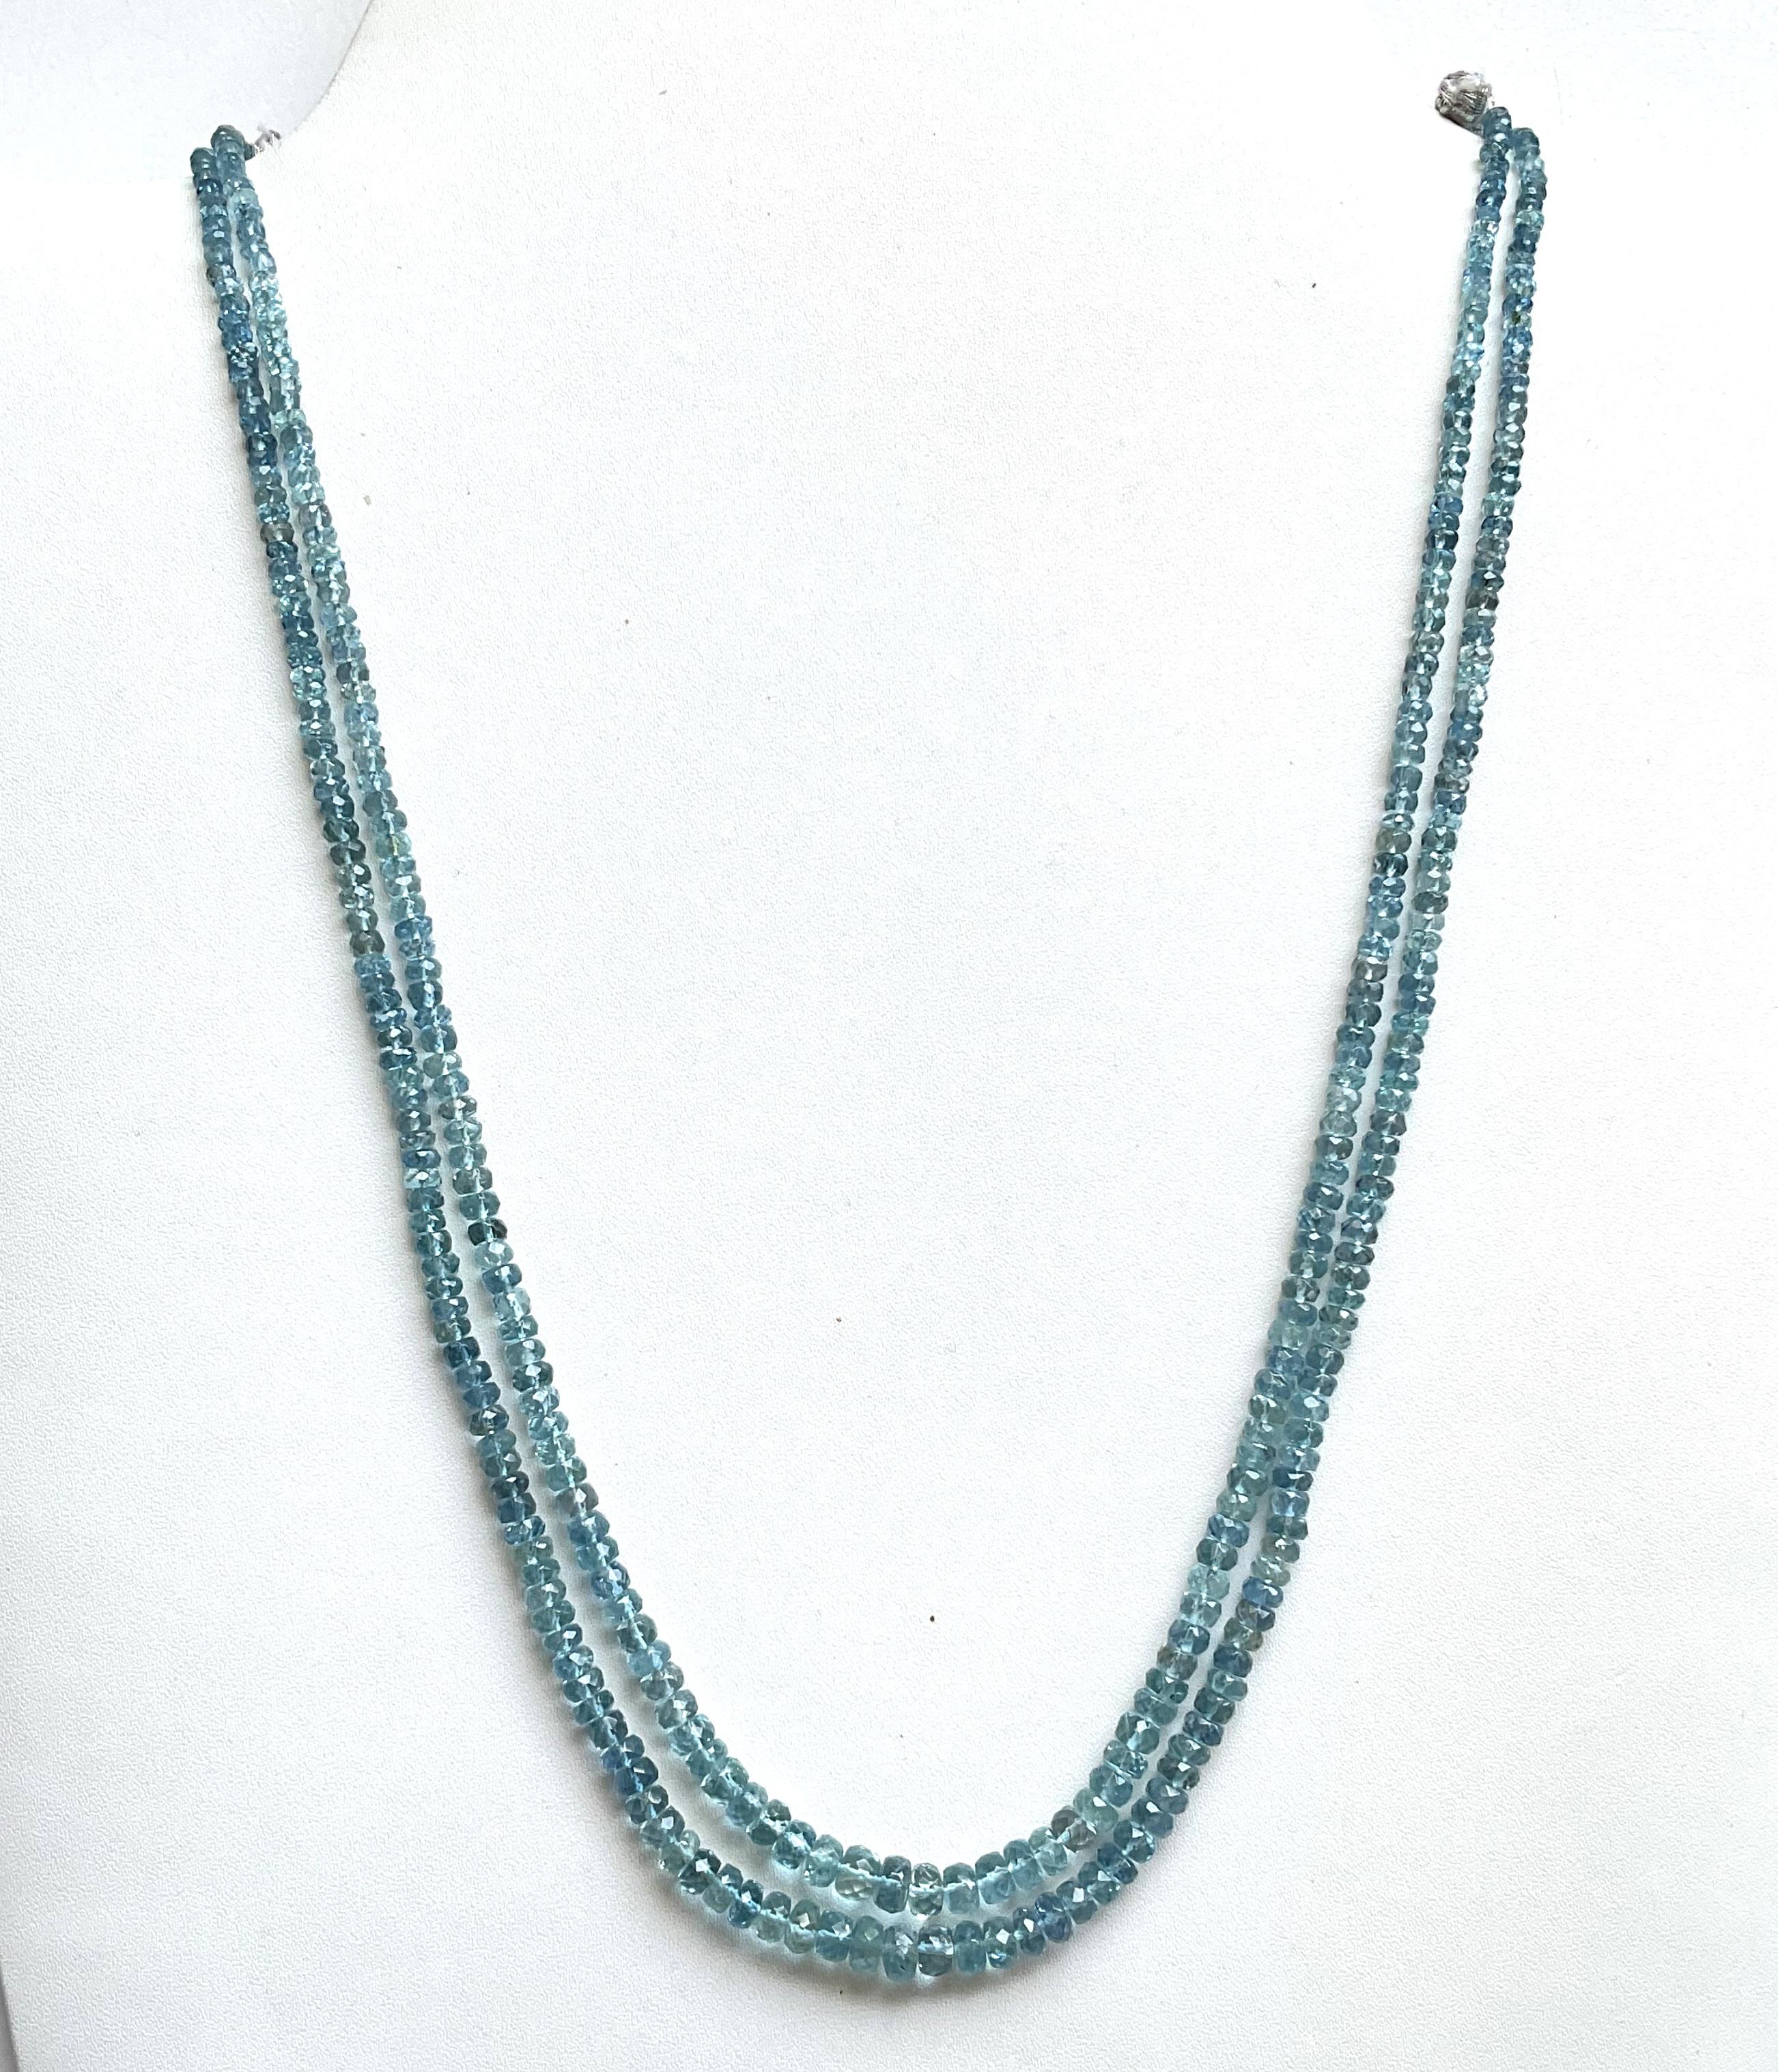 Women's or Men's 117.90 carats Aquamarine Beaded Necklace 2 Strand Faceted Beads good Quality Gem For Sale